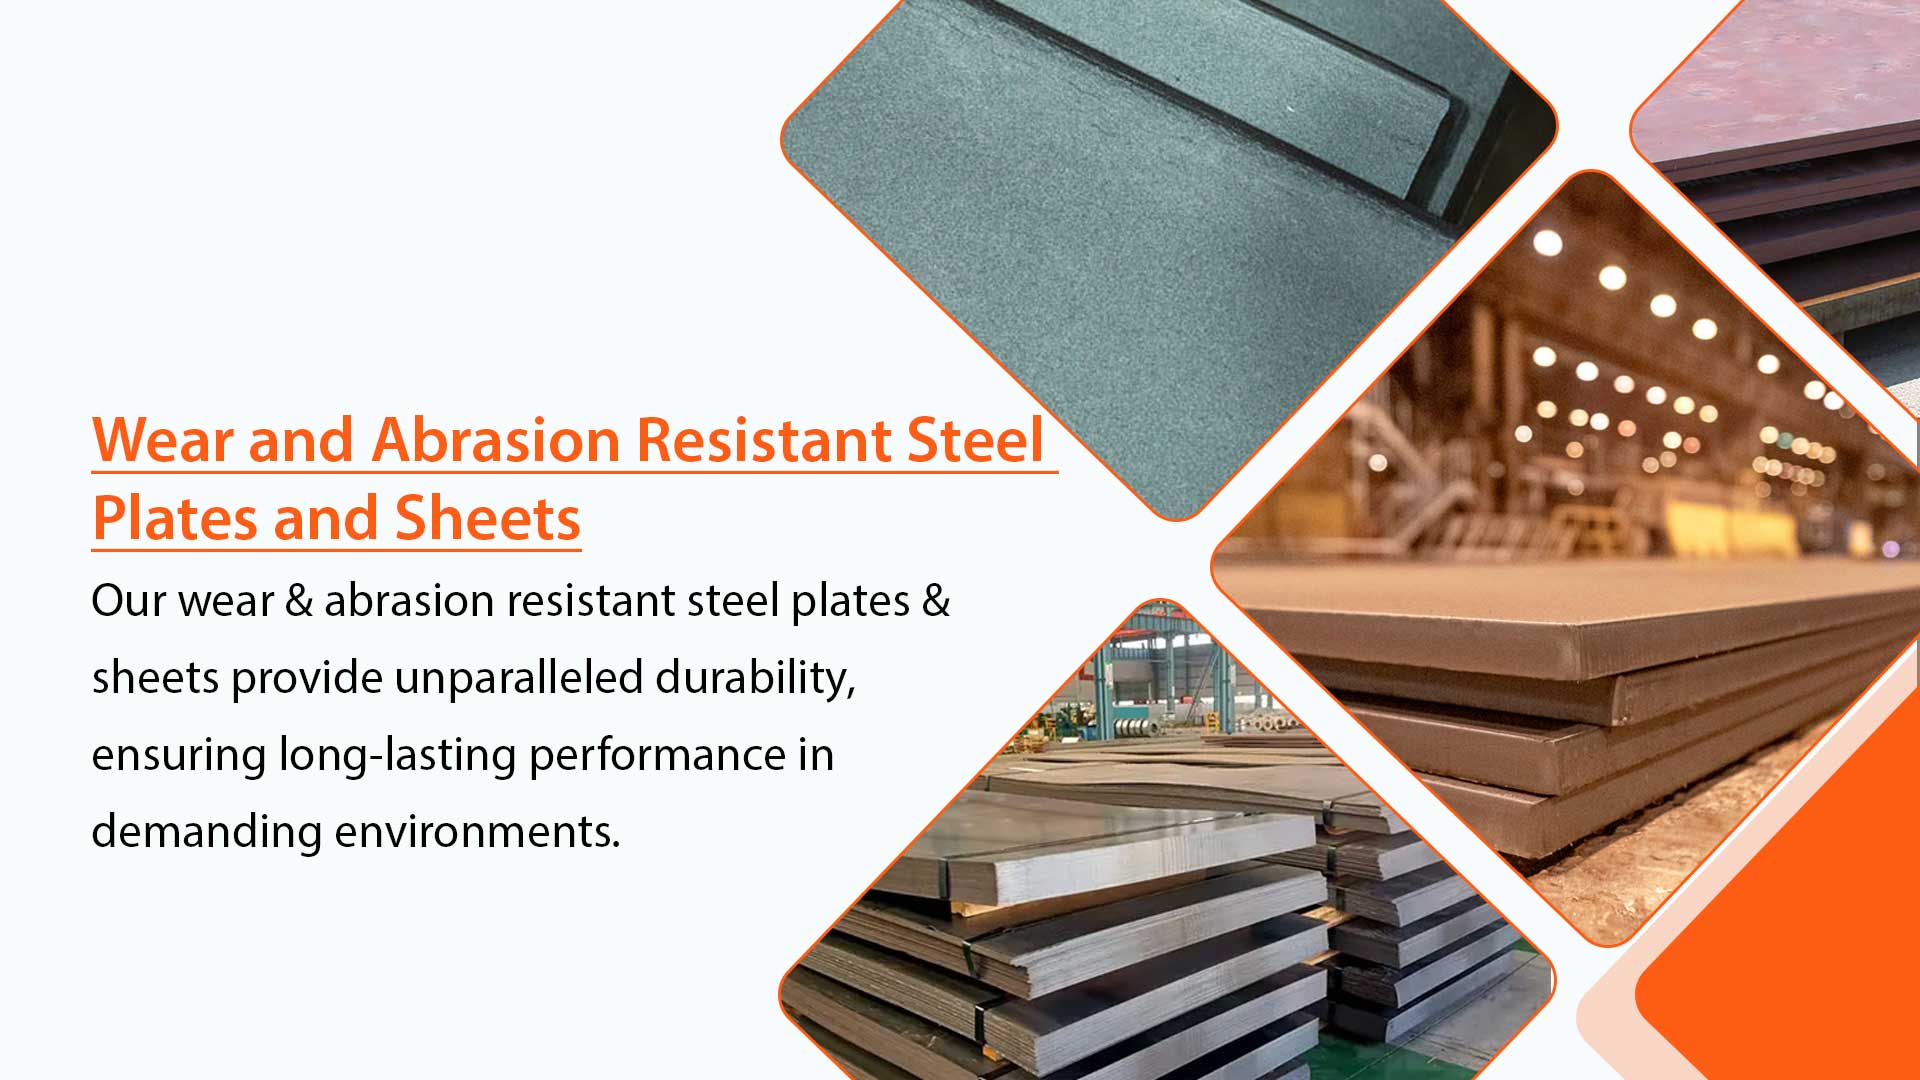 Wear and Abrasion Resistant Steel Plates and Sheets in Brunei